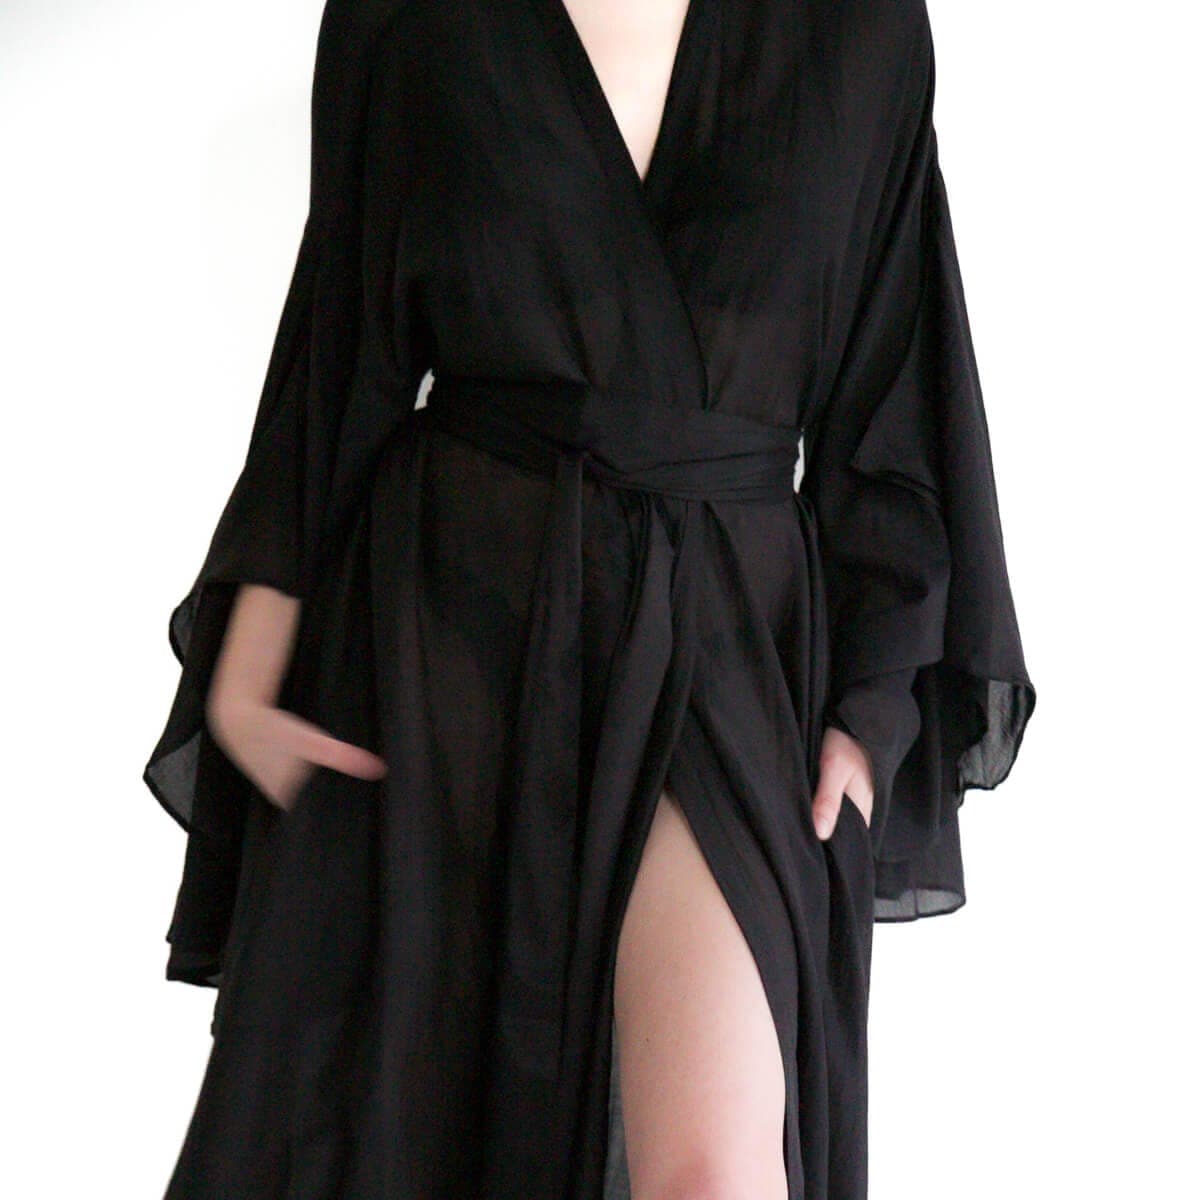 Sunday Forever APPAREL The Goddess Gown and Robe